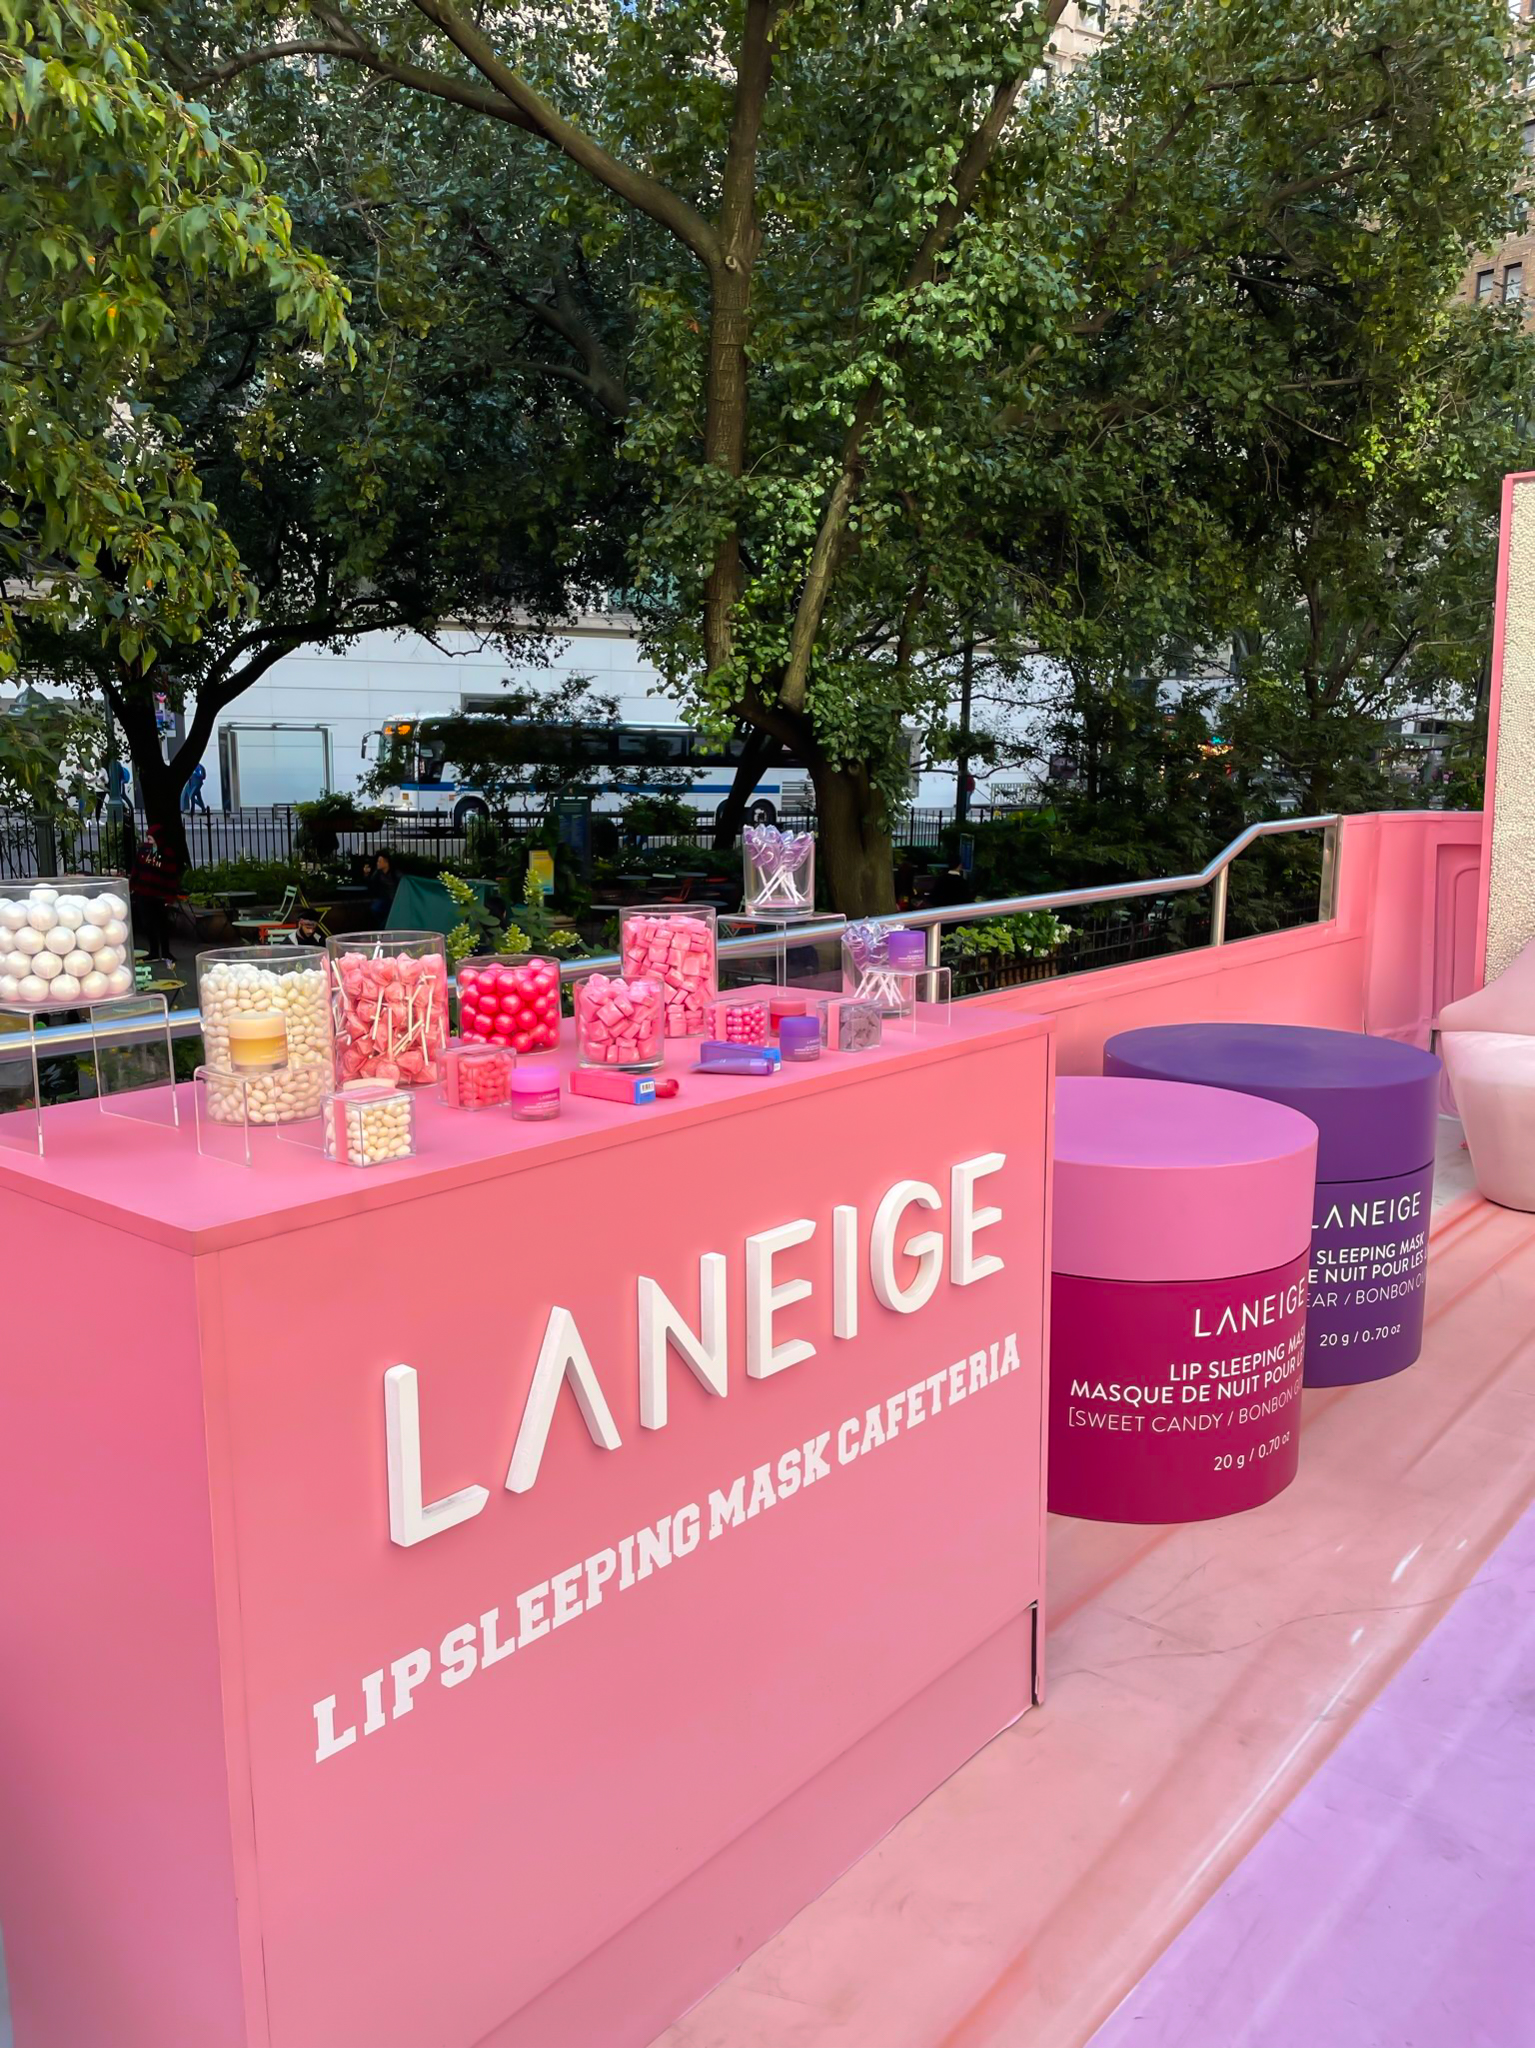 Laneige candy display and product decoration at Laneige pop up.